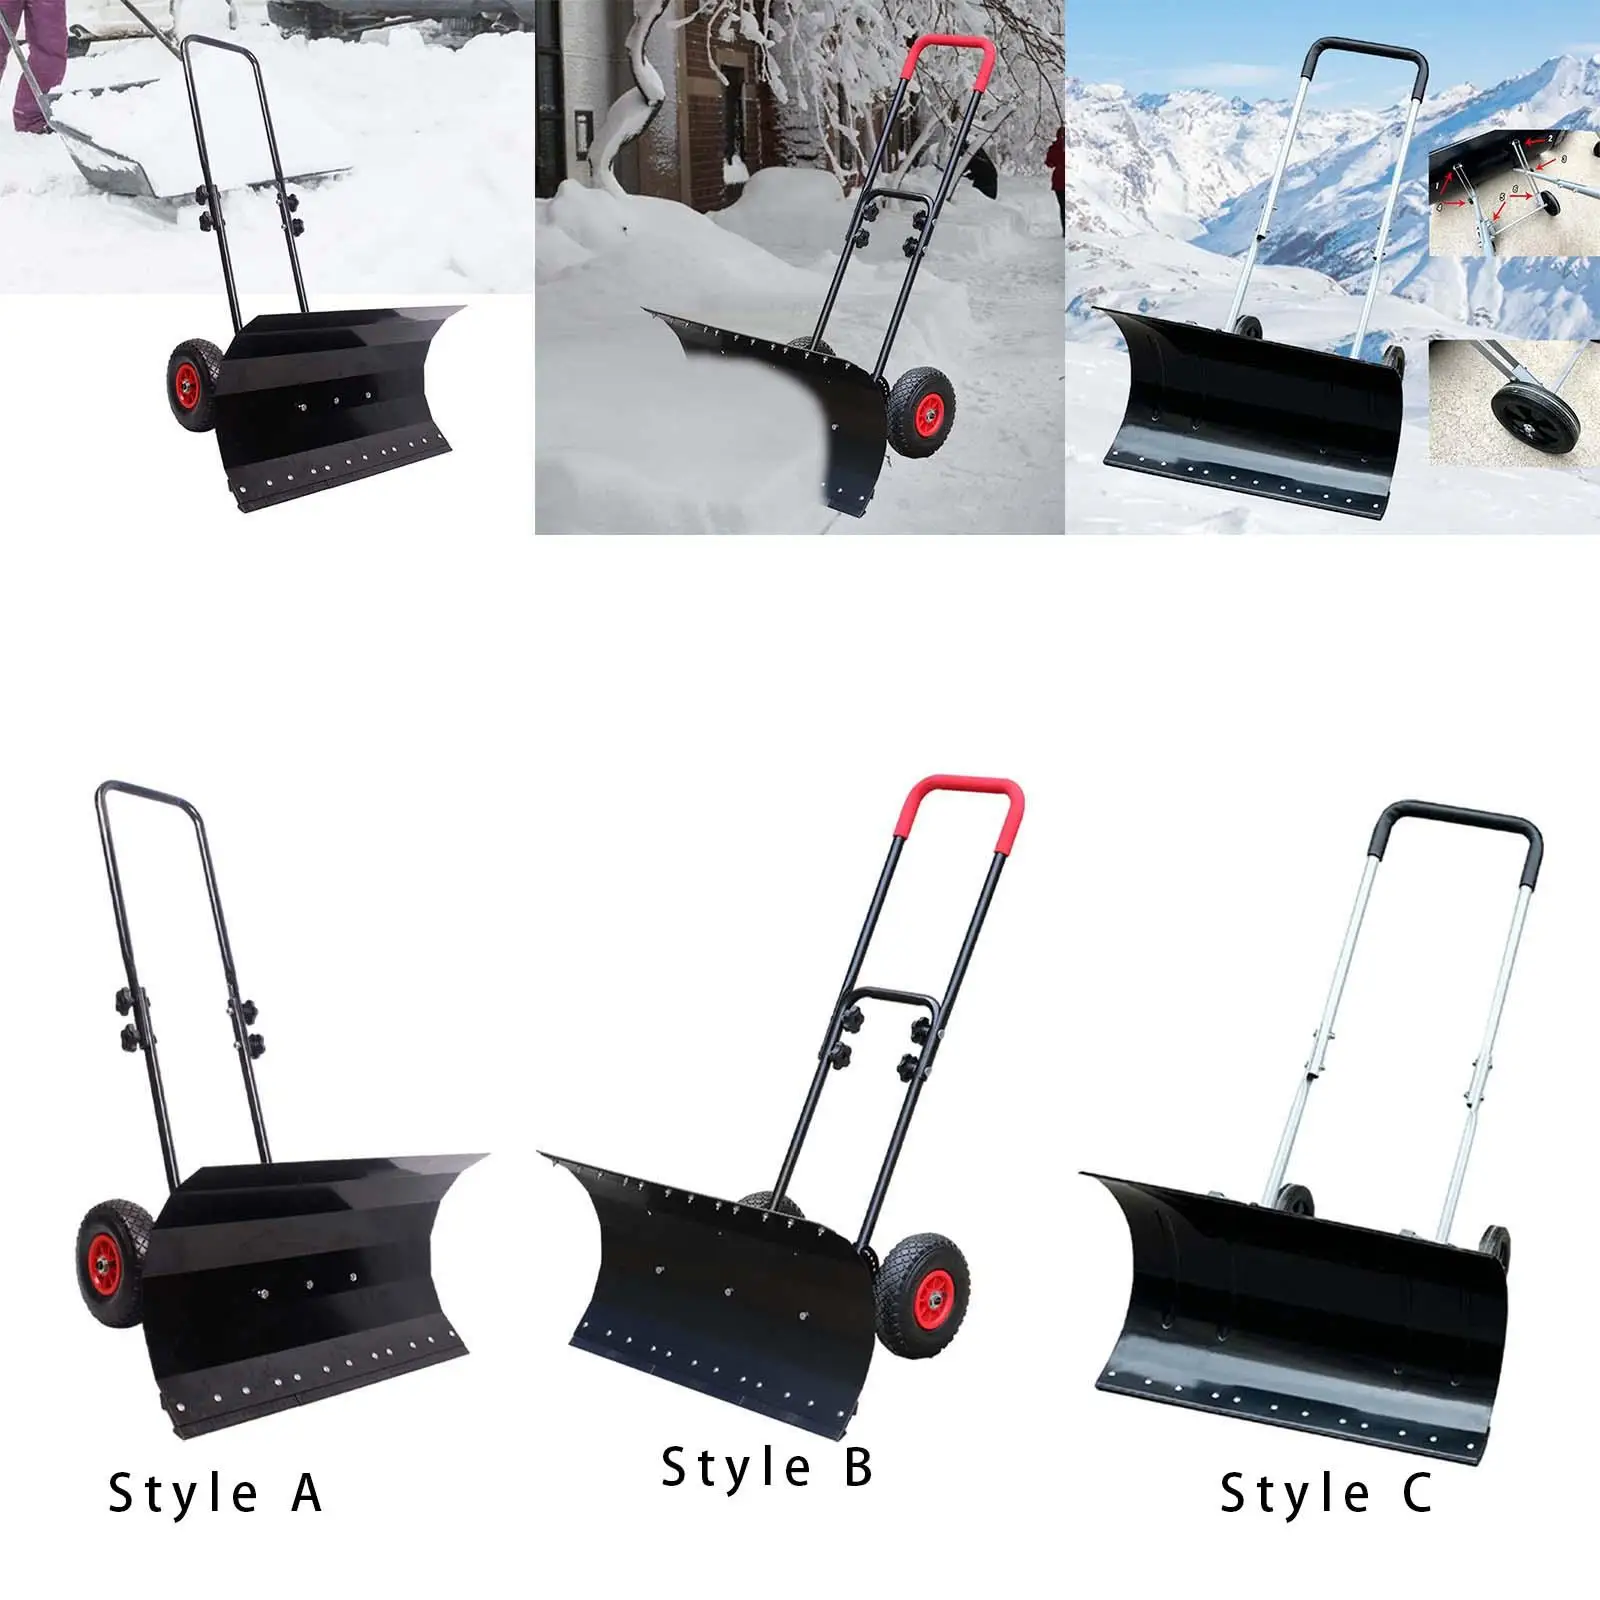 Snow Shovel Ice Scoop Road Cleaning Tool Portable Rolling Pusher Snow Pusher for Sidewalk Winter Doorway Yard Pavement Clearing